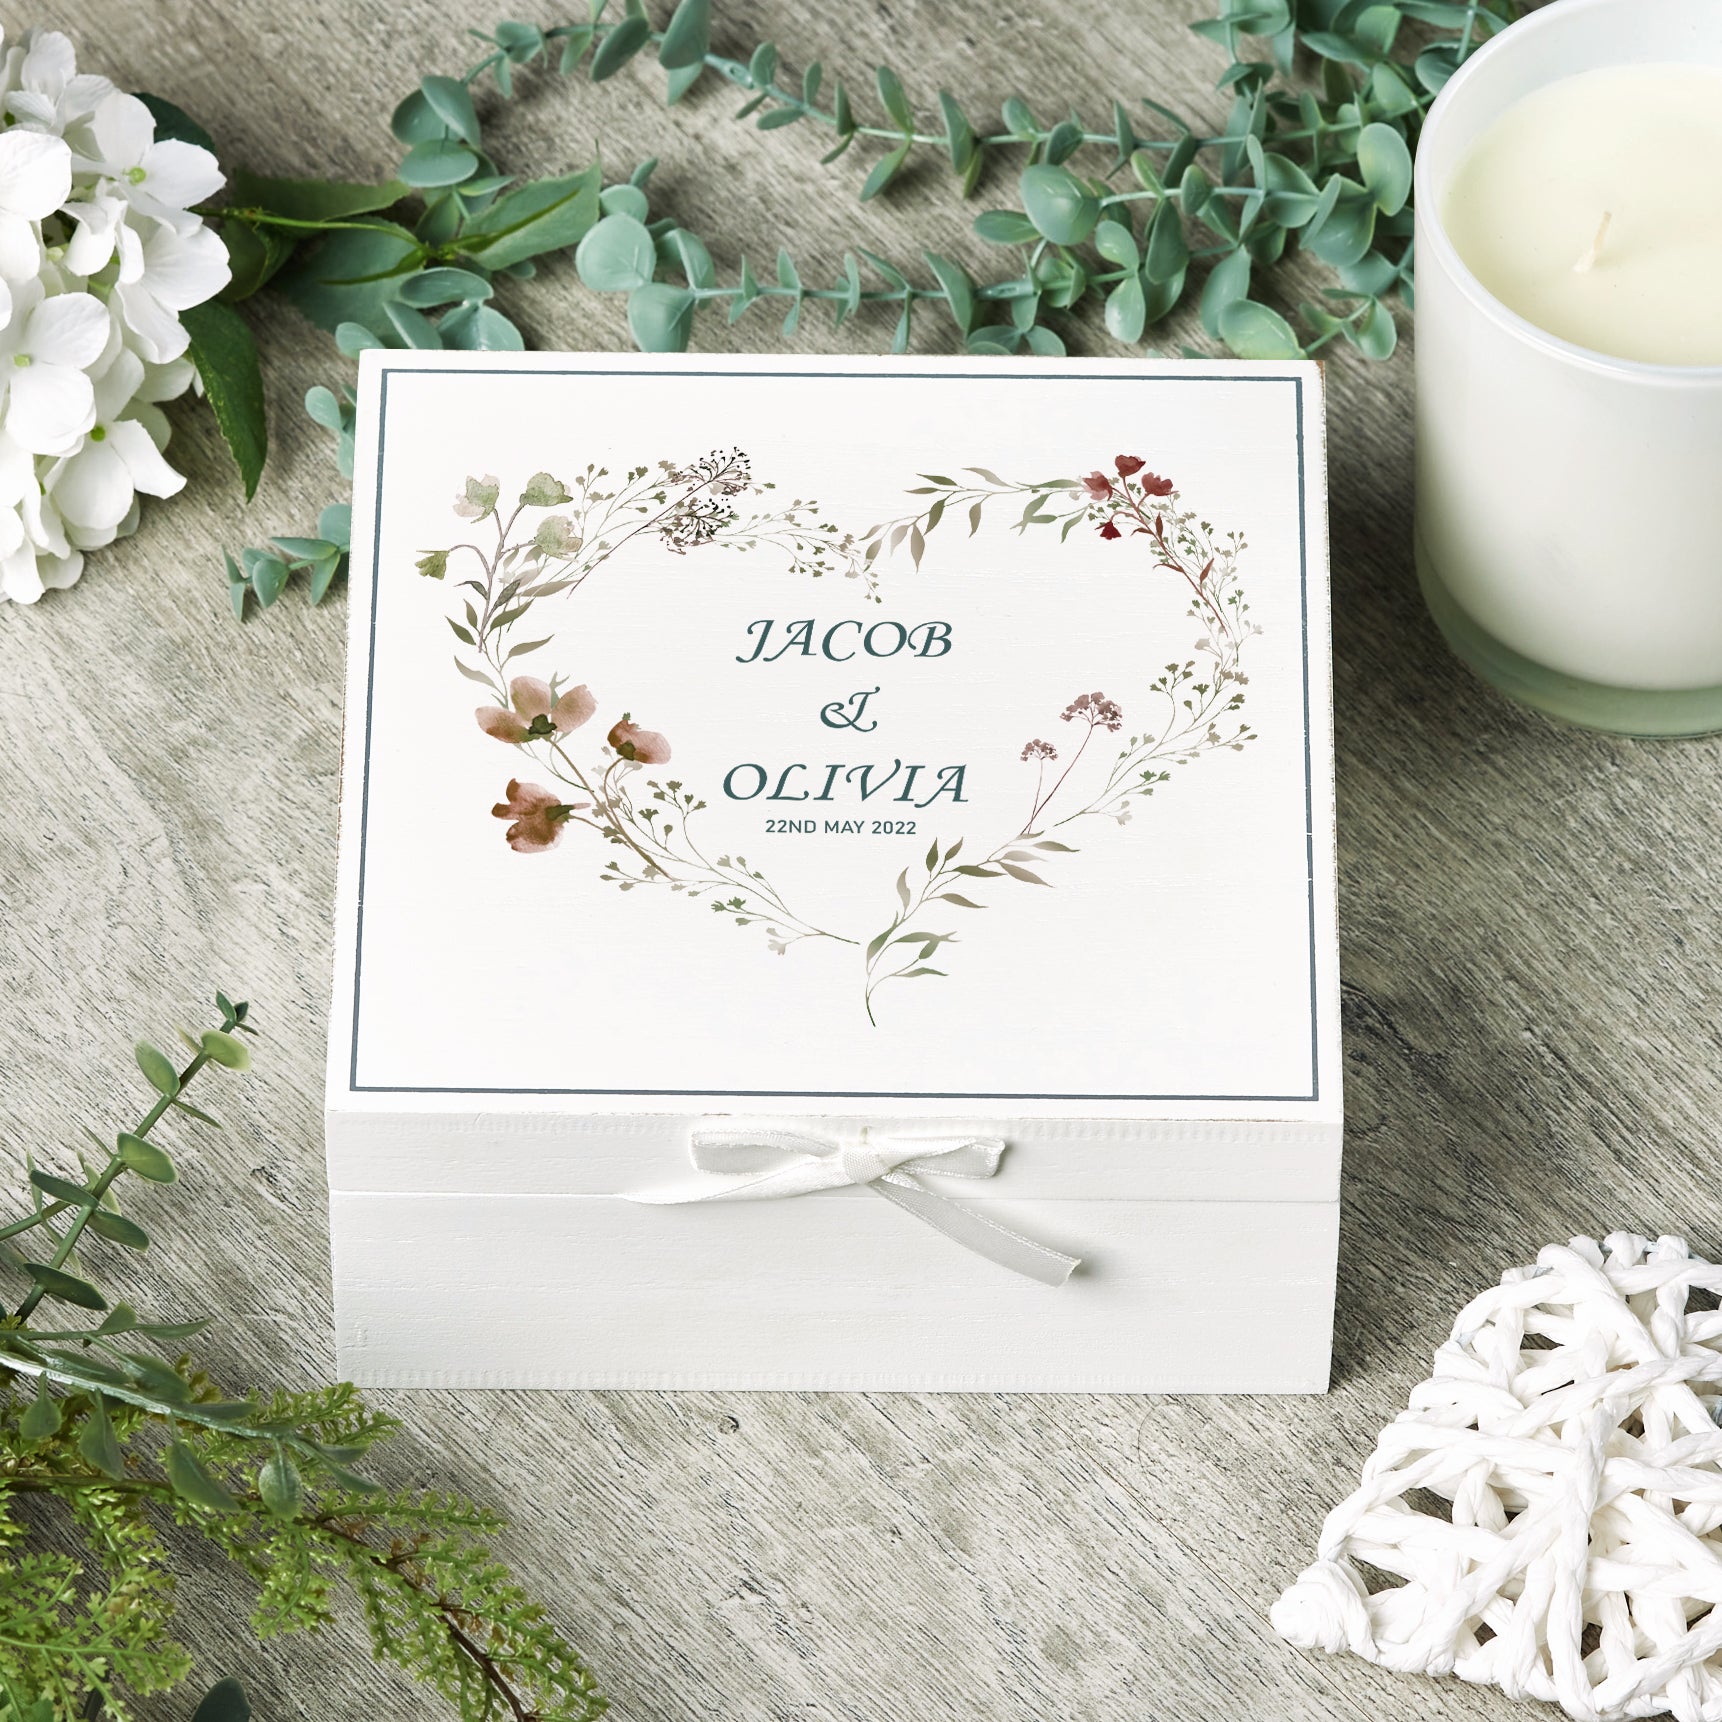 Personalised Wedding Day Vintage Wooden Keepsake Box Gift With Dusty Watercolour Floral Heart Print